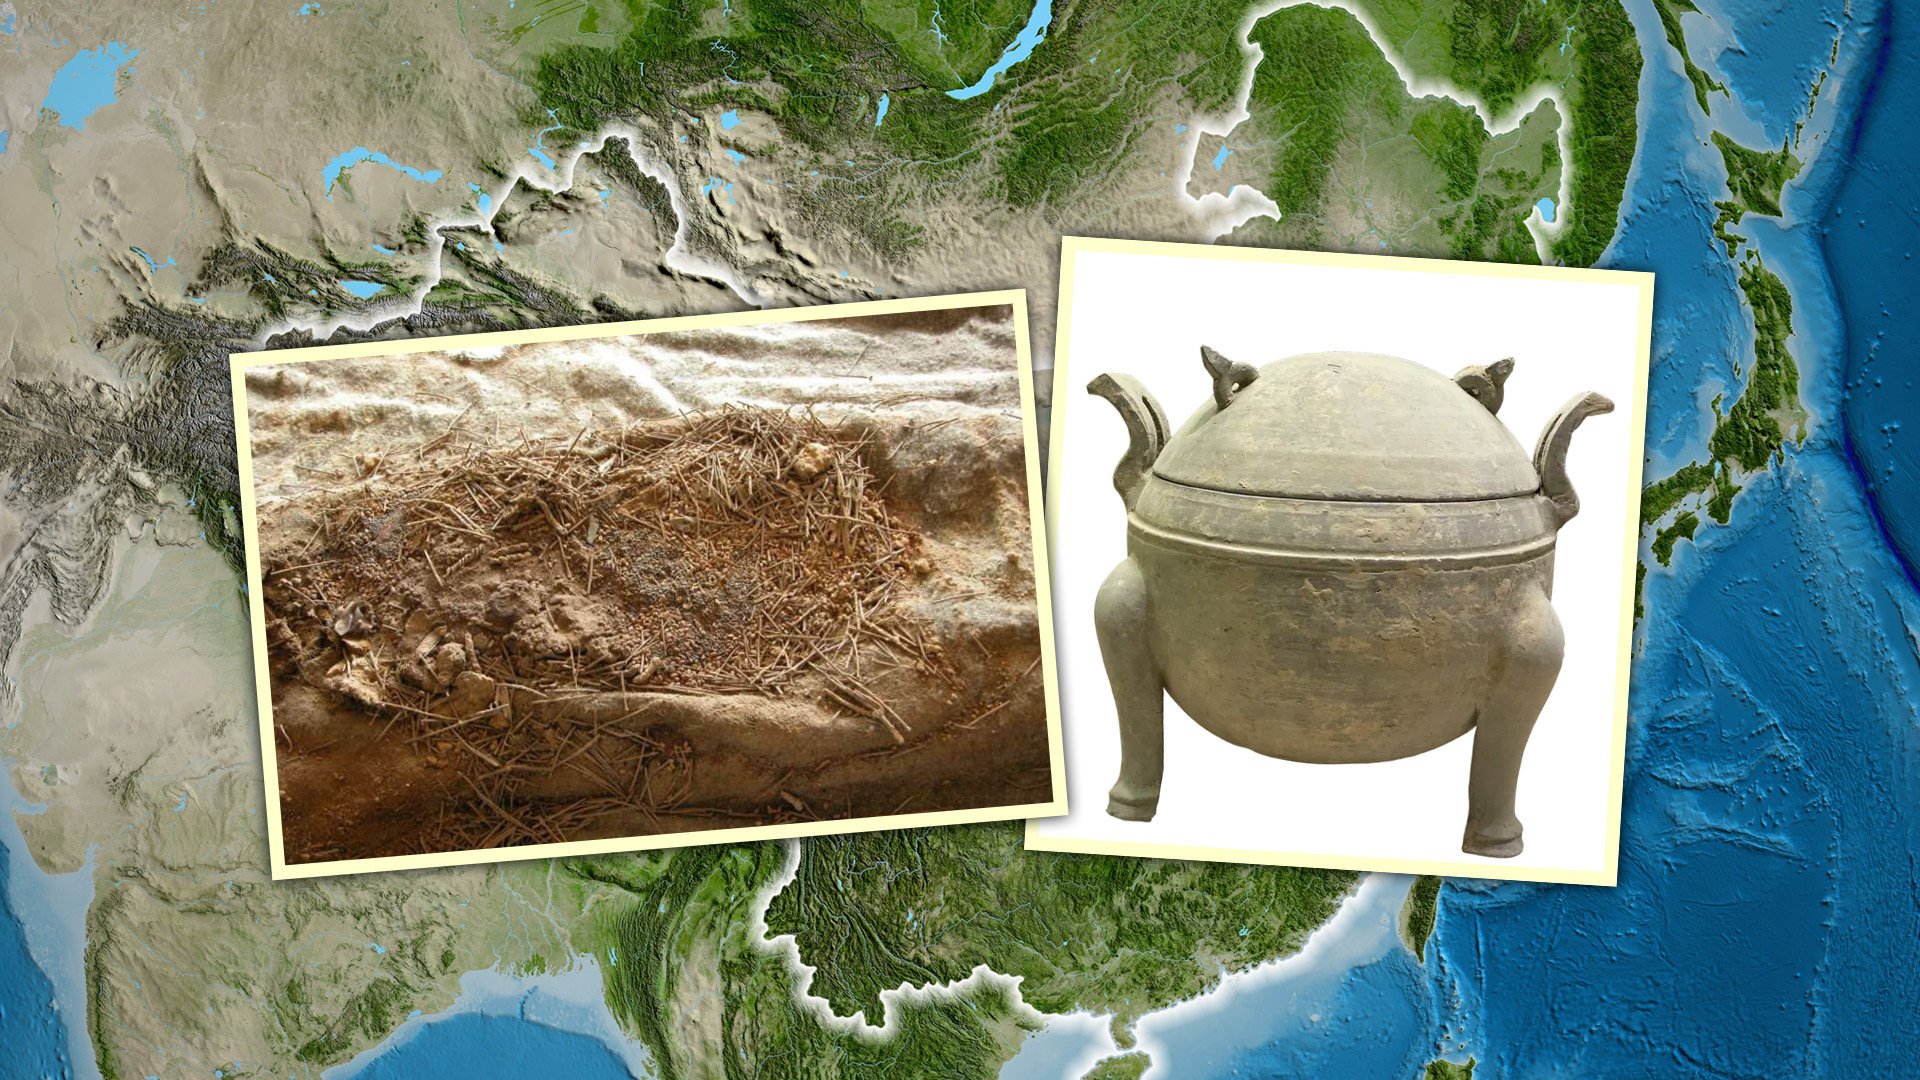 The fresh archaeological study of pottery remnants from China strongly suggest that the myriad of regional cooking styles in the mainland stretch back into ancient times. Photo: SCMP composite/Shutterstock/Phys.org/Baidu